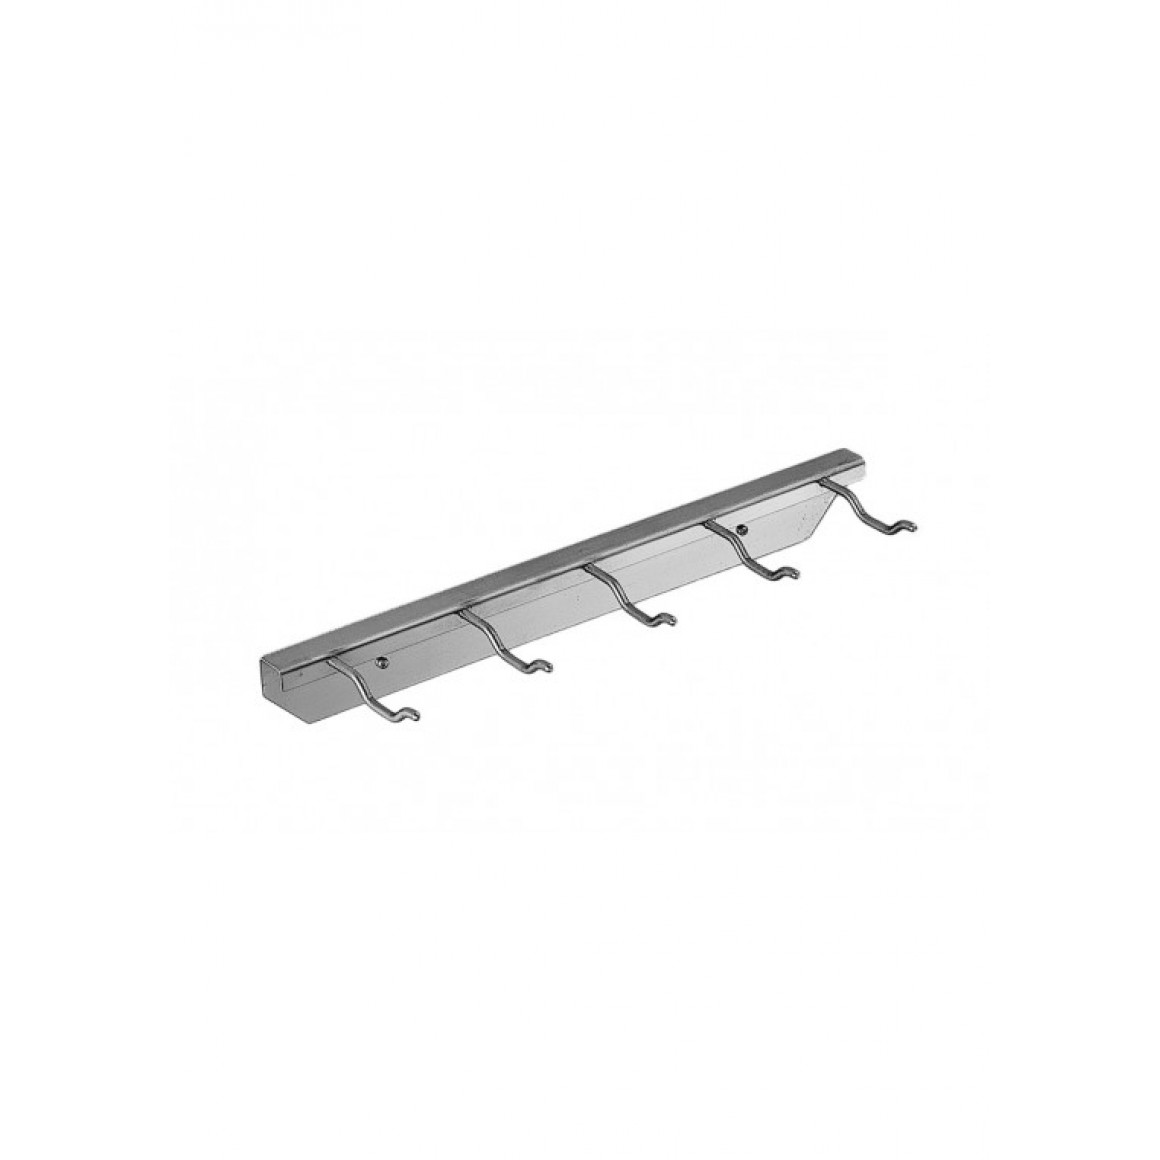 Stainless steel wall rack for utensils, with 5 hooks